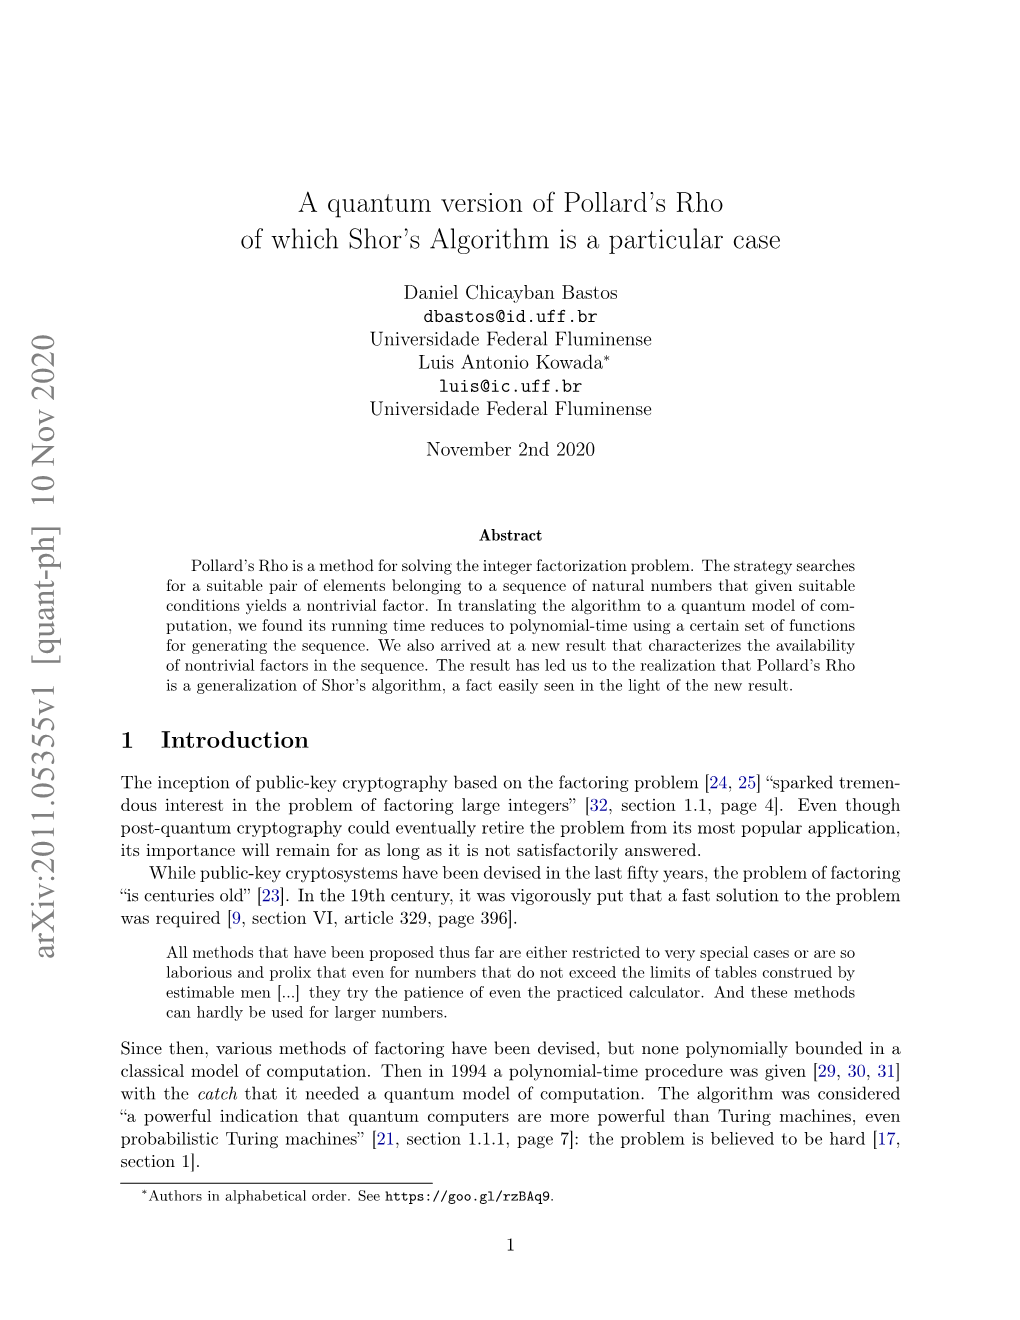 A Quantum Version of Pollard's Rho of Which Shor's Algorithm Is a Particular Case